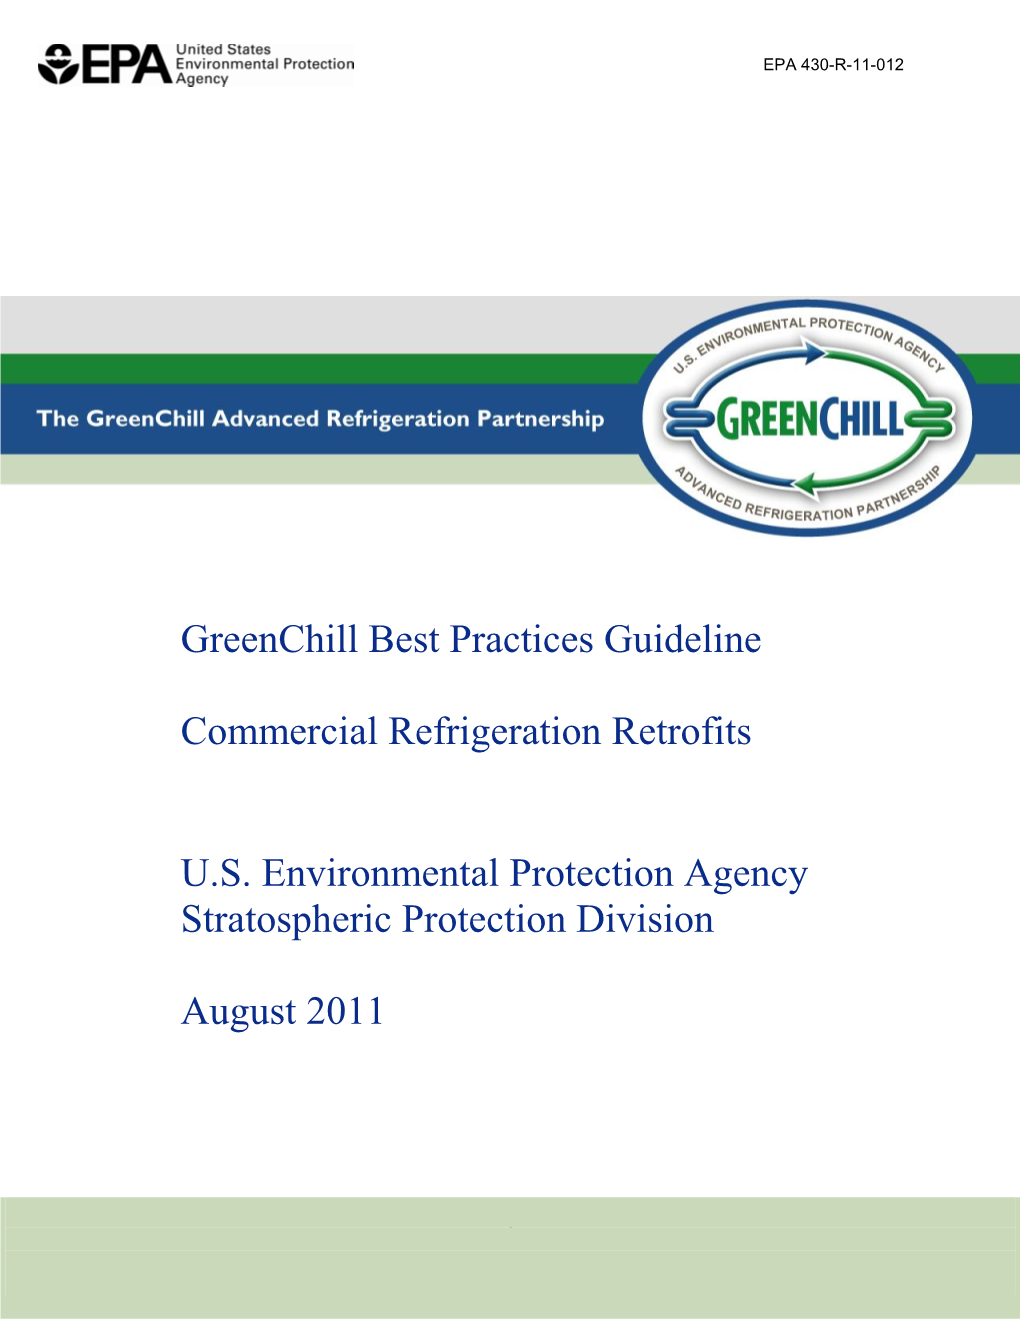 Greenchill Best Practices Guidelines: Commercial Refrigeration Retrofits